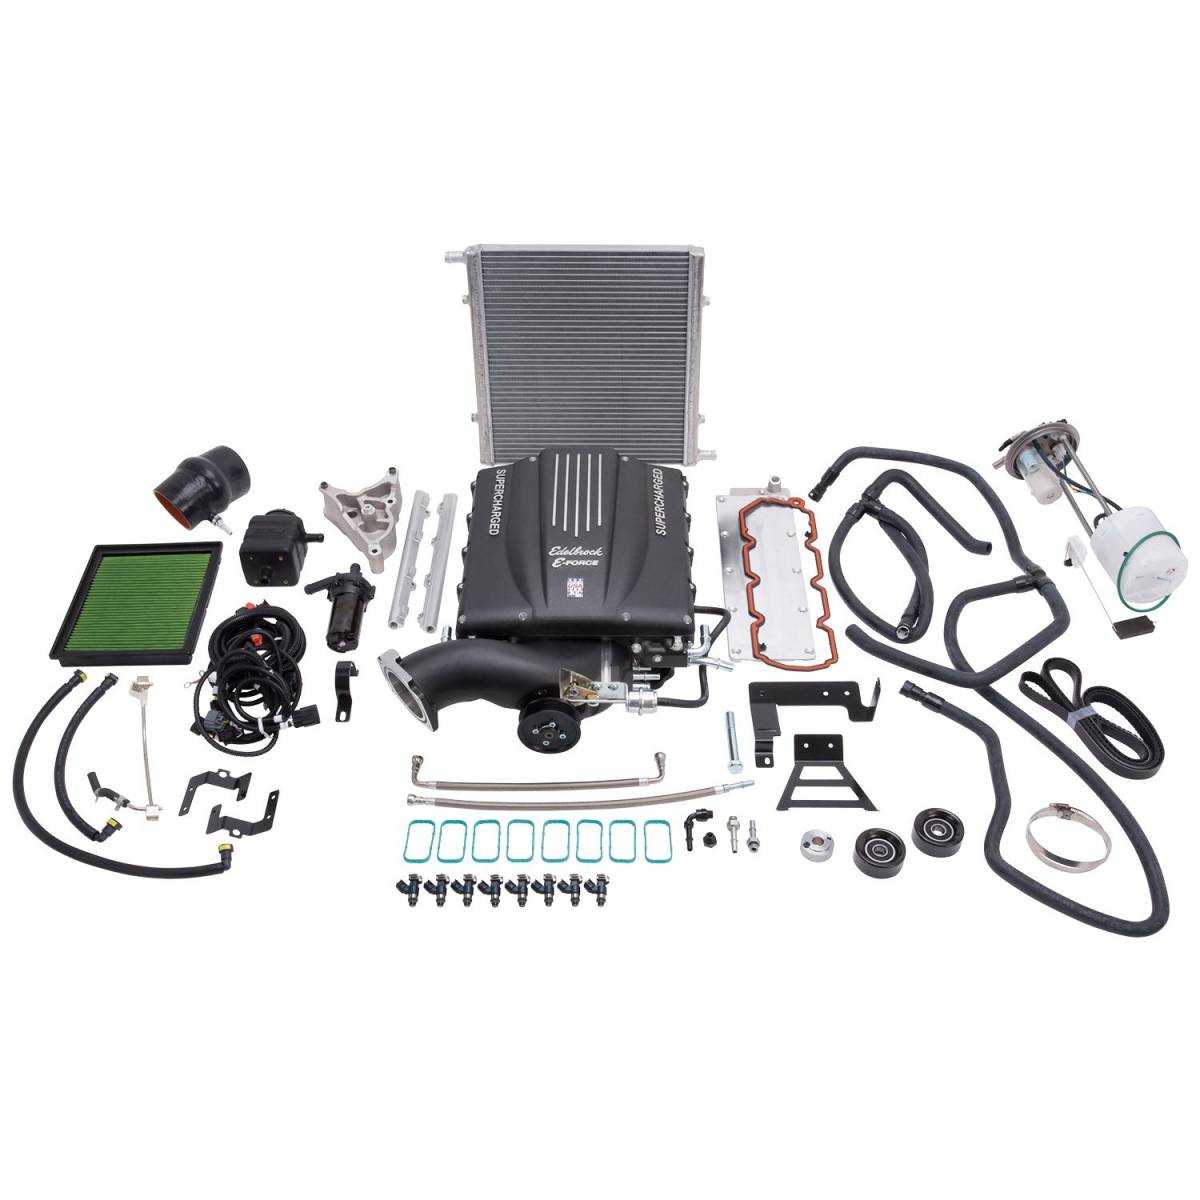 Edelbrock - Chevy Silverado GMC Sierra 2500 6.0L 2011-2013 Edelbrock Stage 1 Complete Supercharger Intercooled Kit Without Tune - Image 1